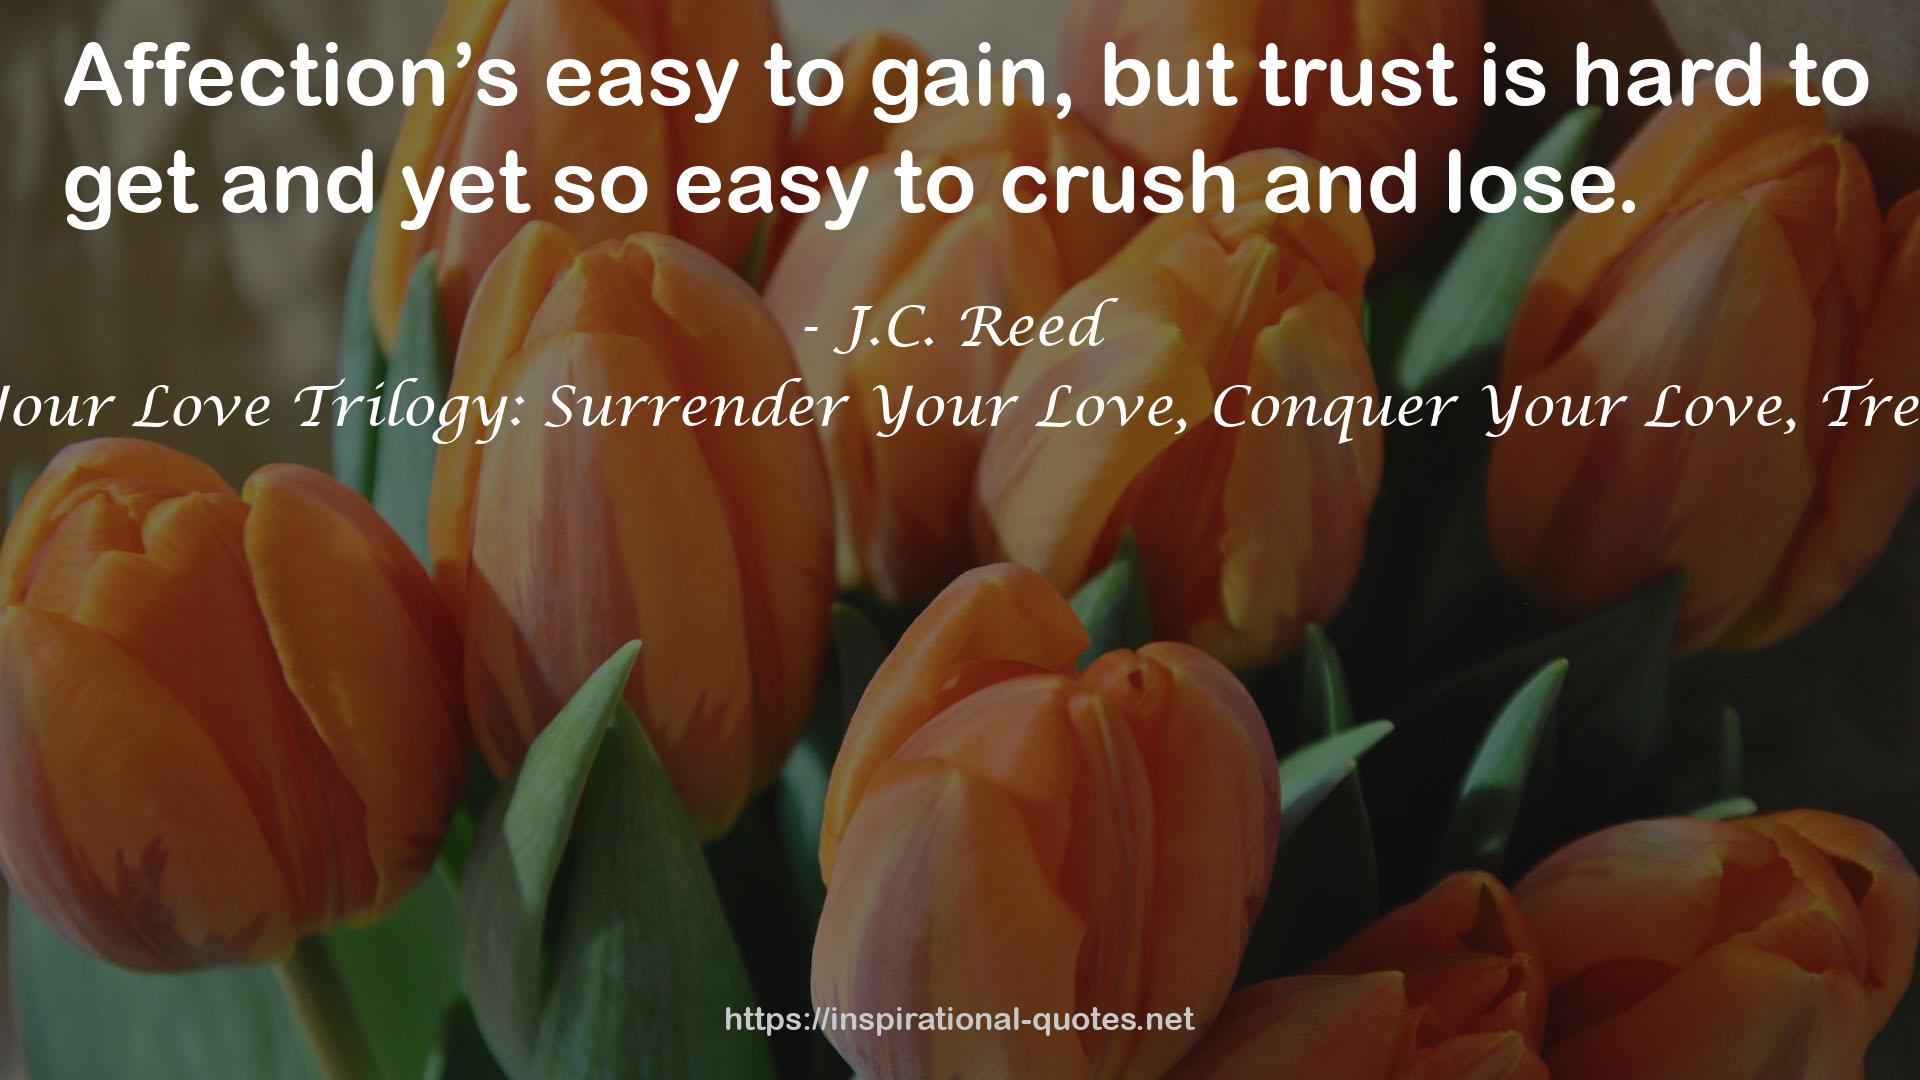 The Surrender Your Love Trilogy: Surrender Your Love, Conquer Your Love, Treasure Your Love QUOTES